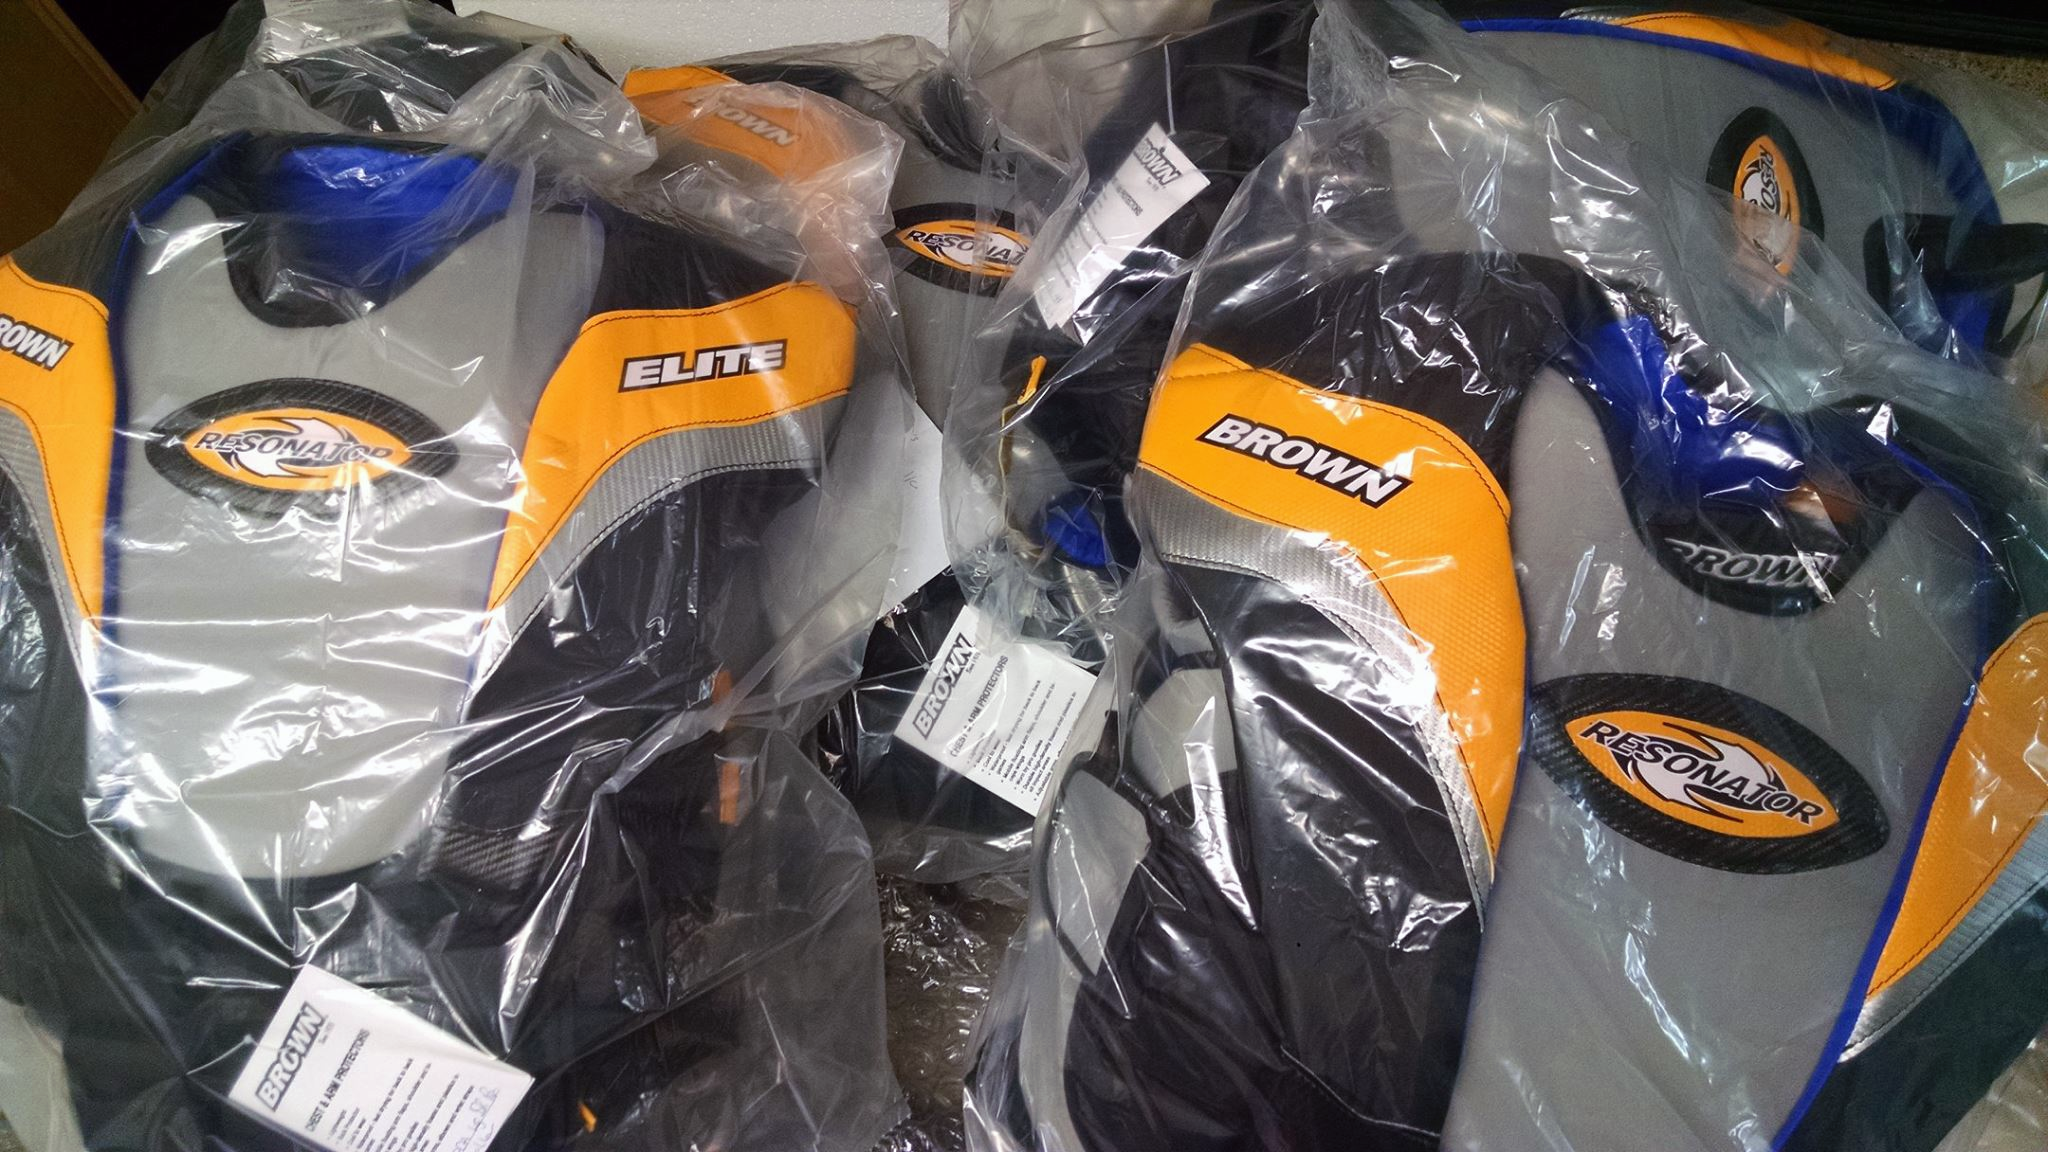 Chest protectors in bags ready for shipment